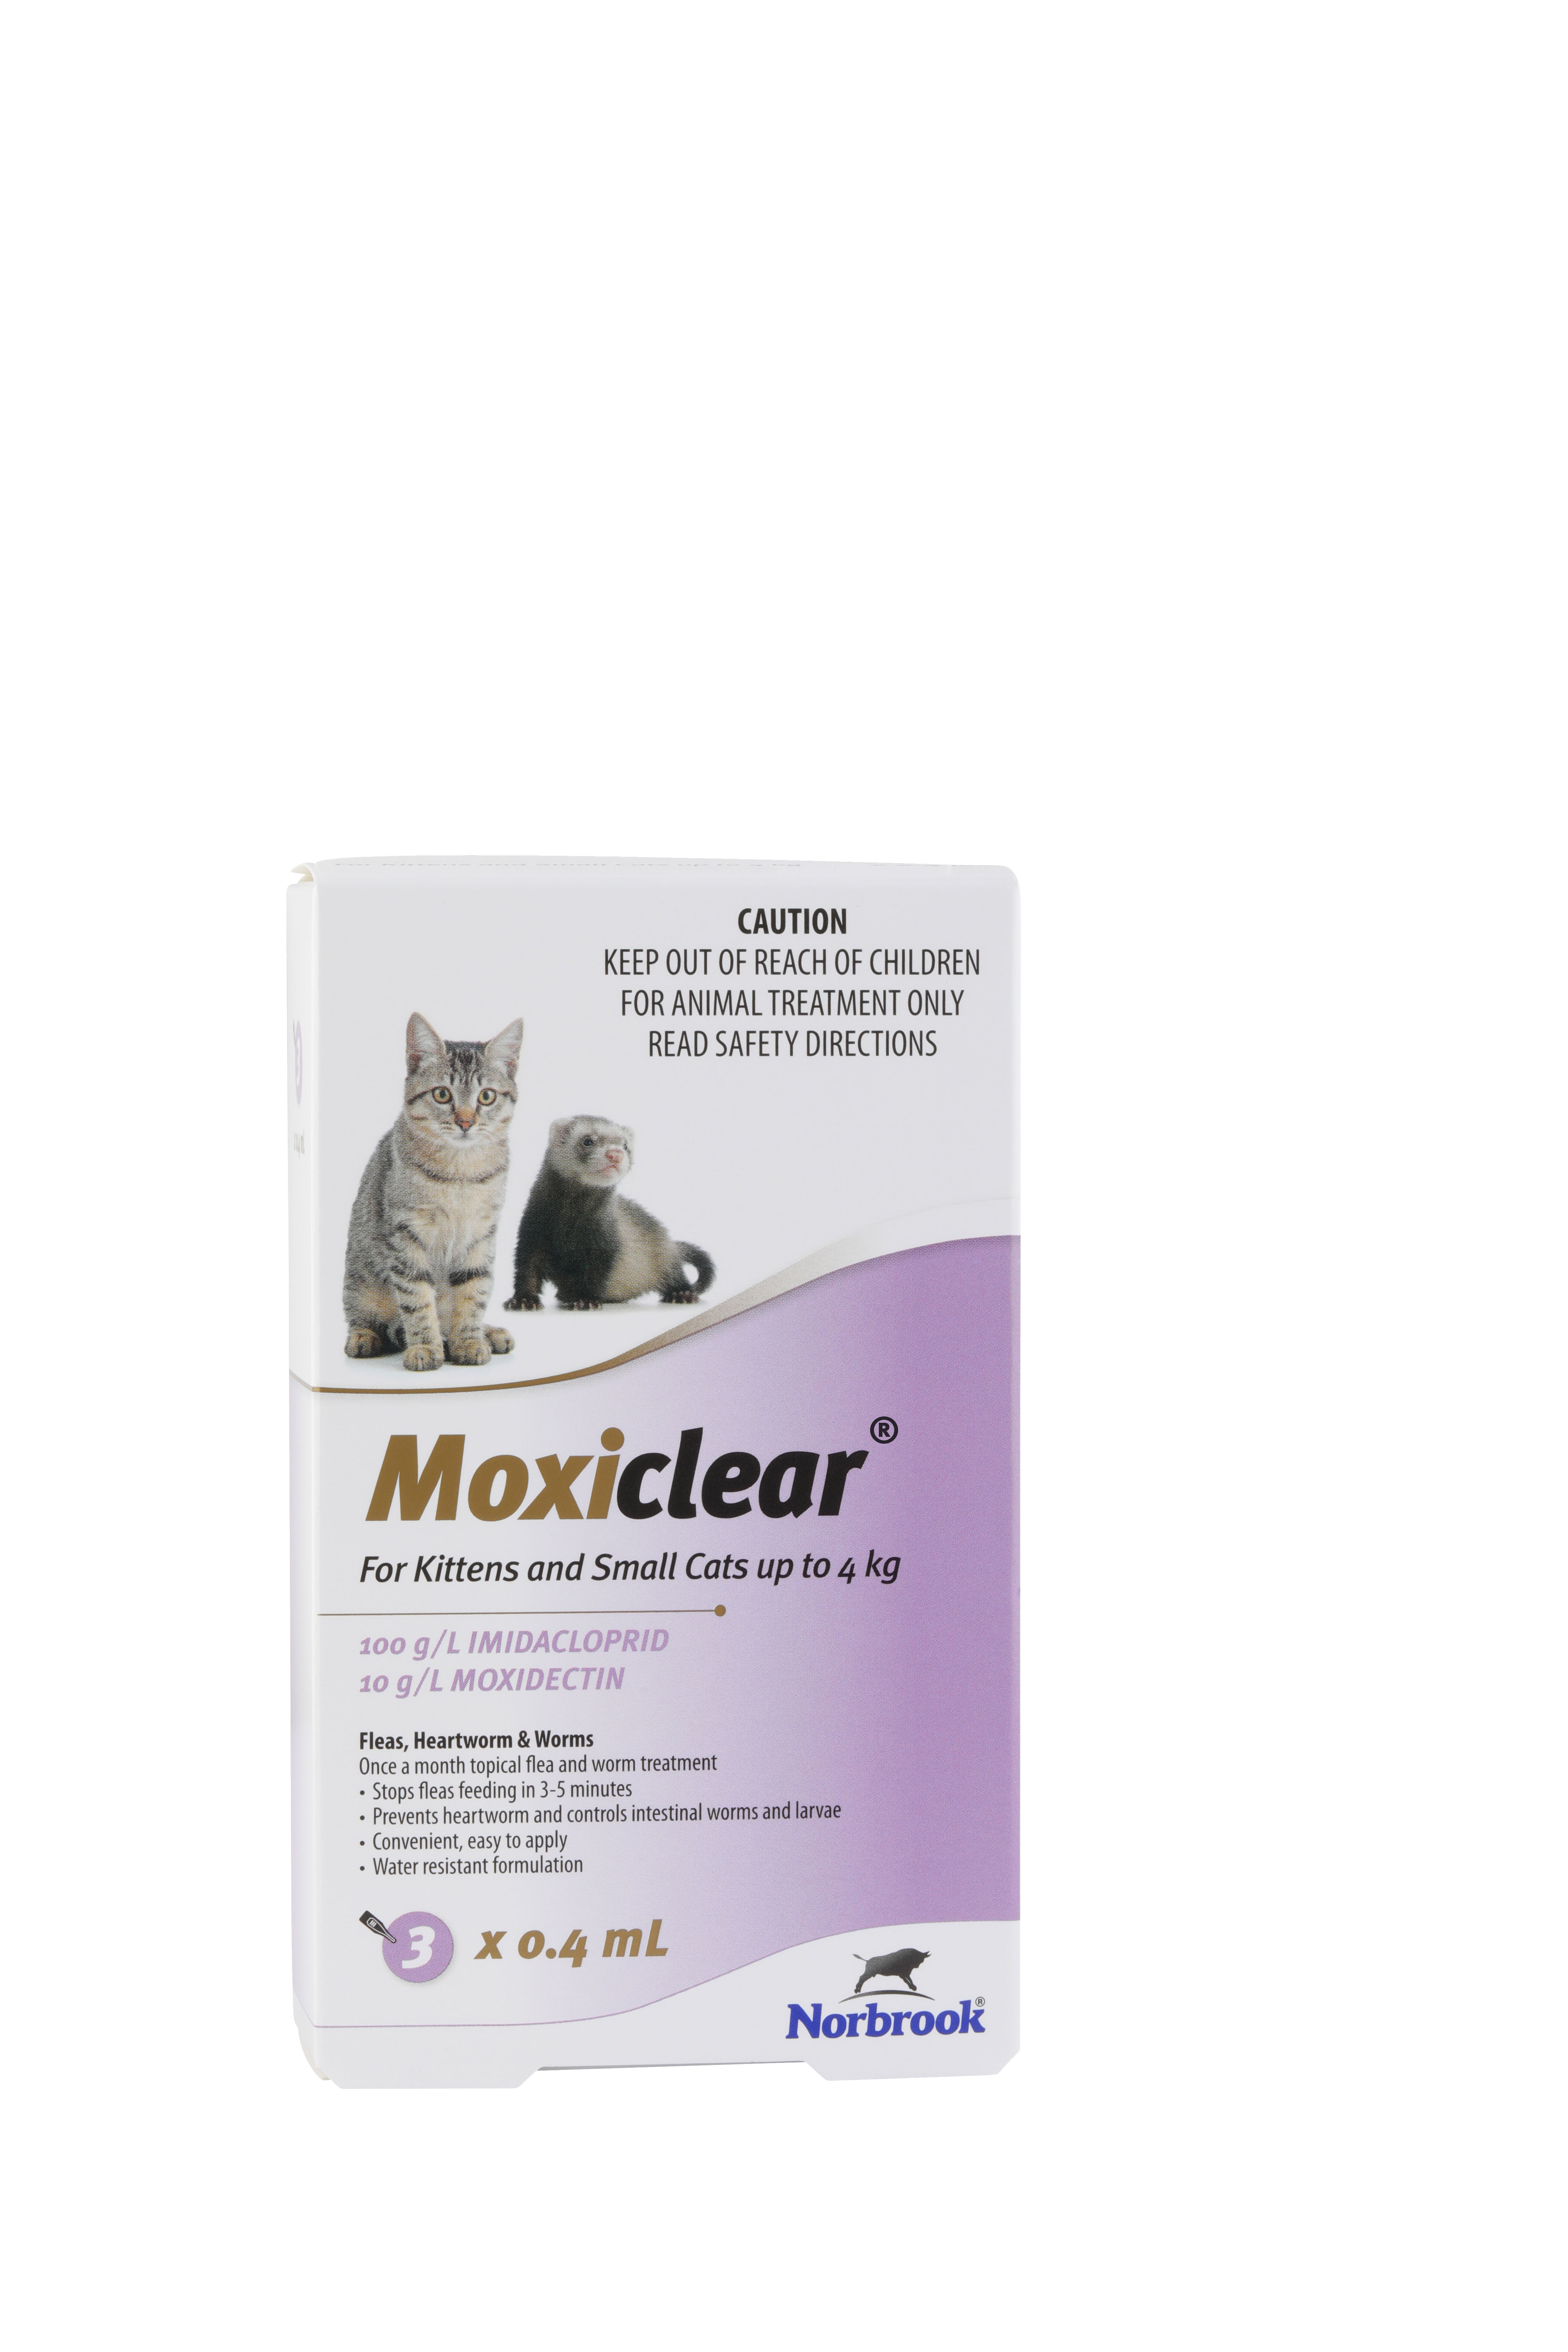 Moxiclear for Kittens & Small Cats 3pk